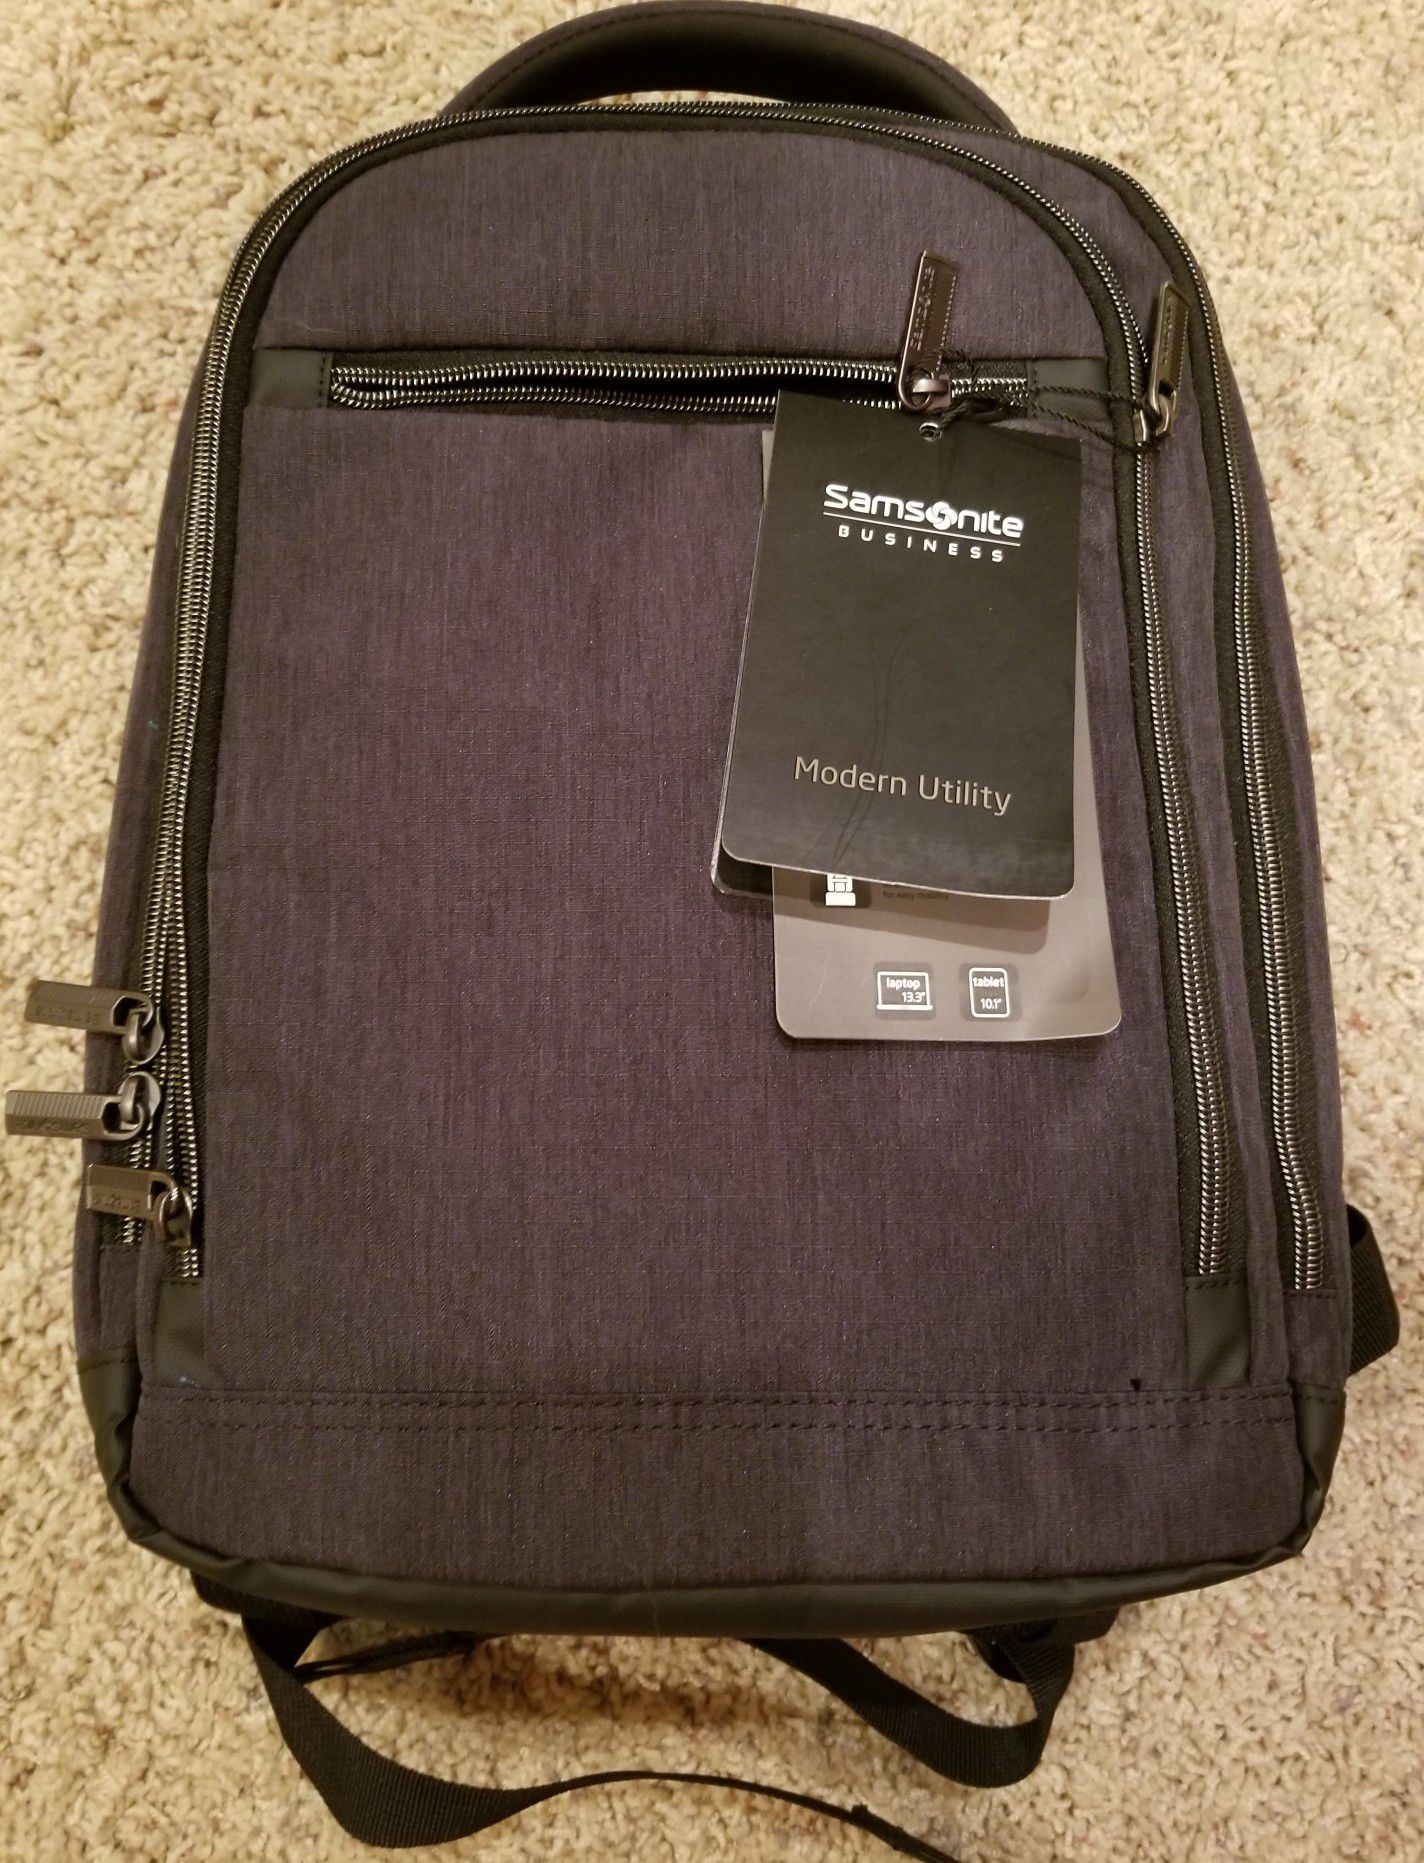 Brand new with tags Samsonite backpack/laptop carrier